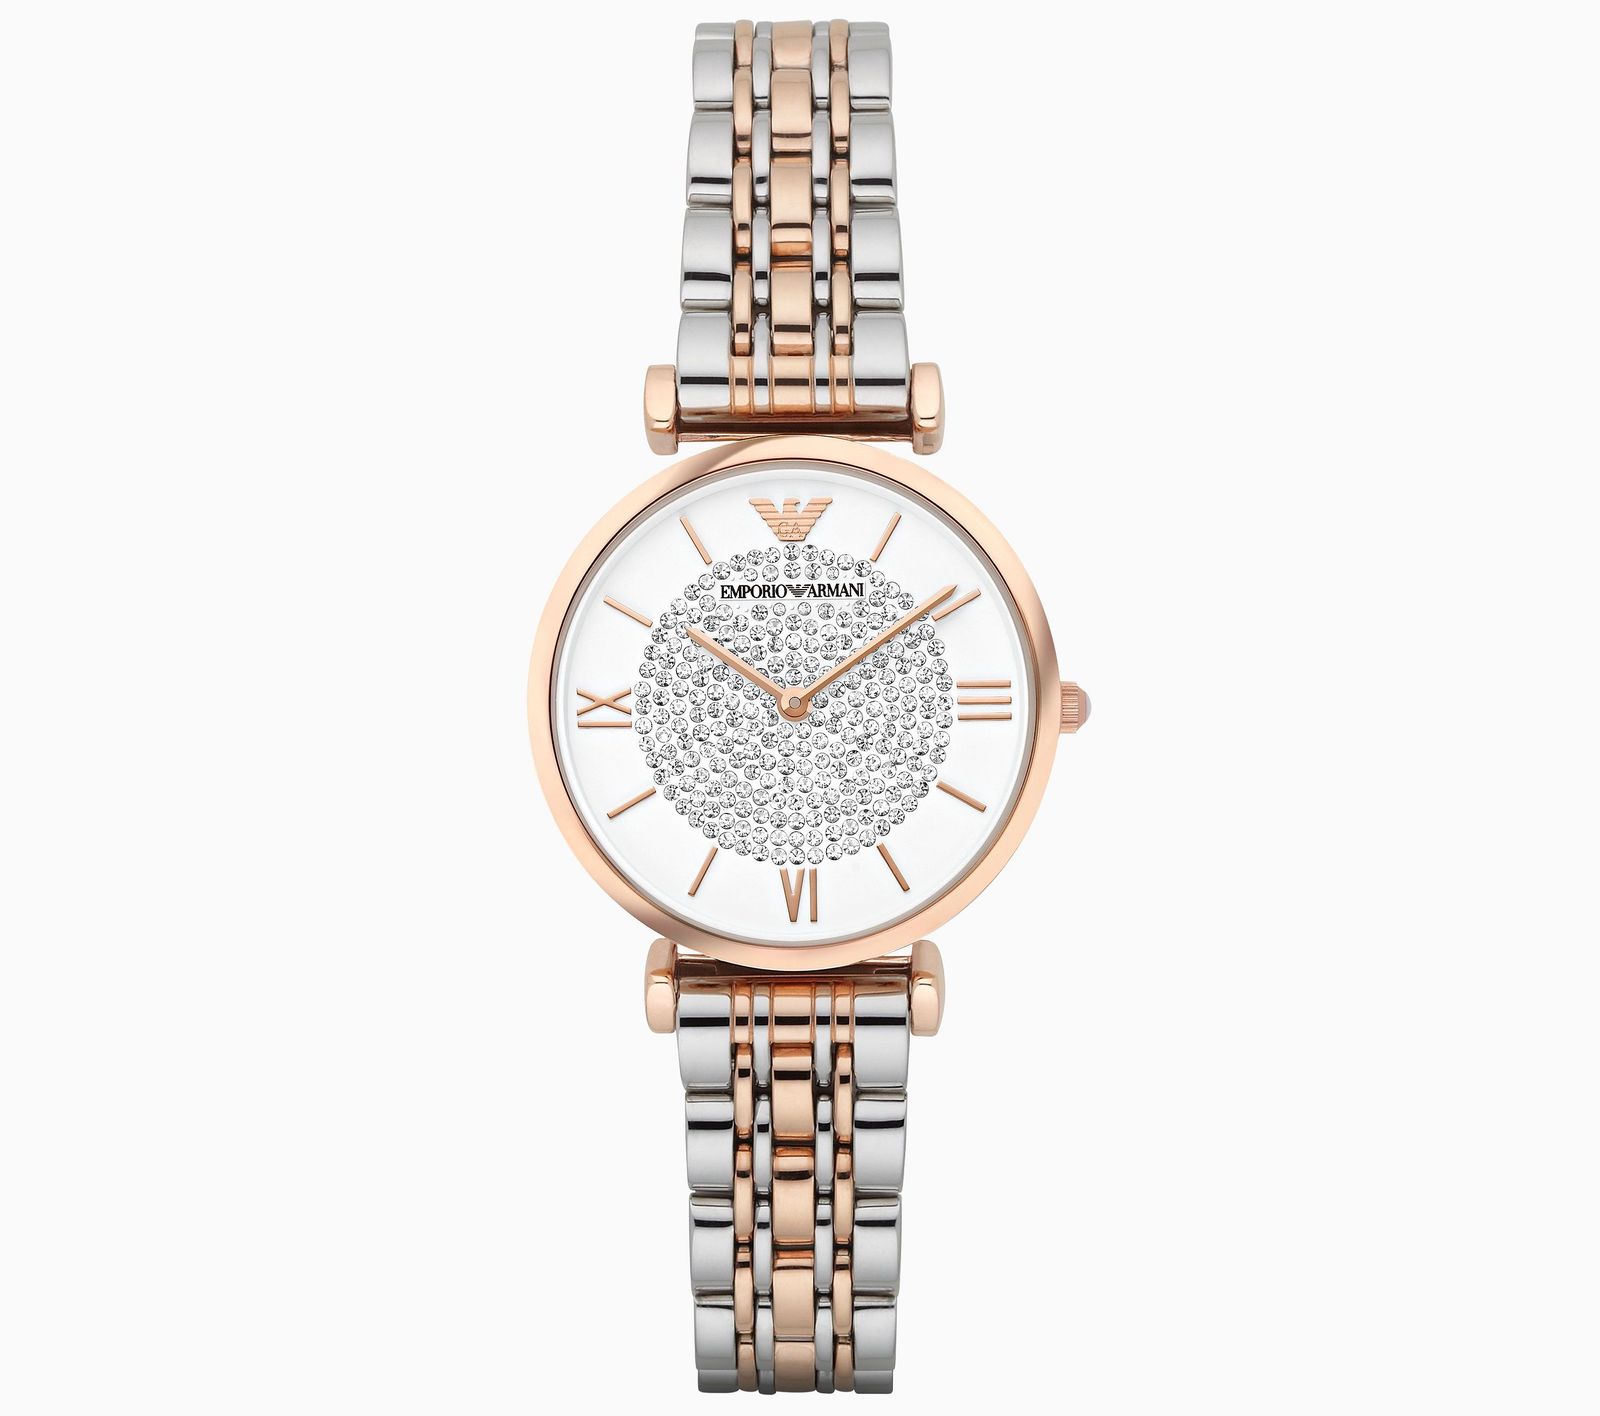 Emporio Armani Classic Stainless Steel Two-Tone Women's Watch AR1926